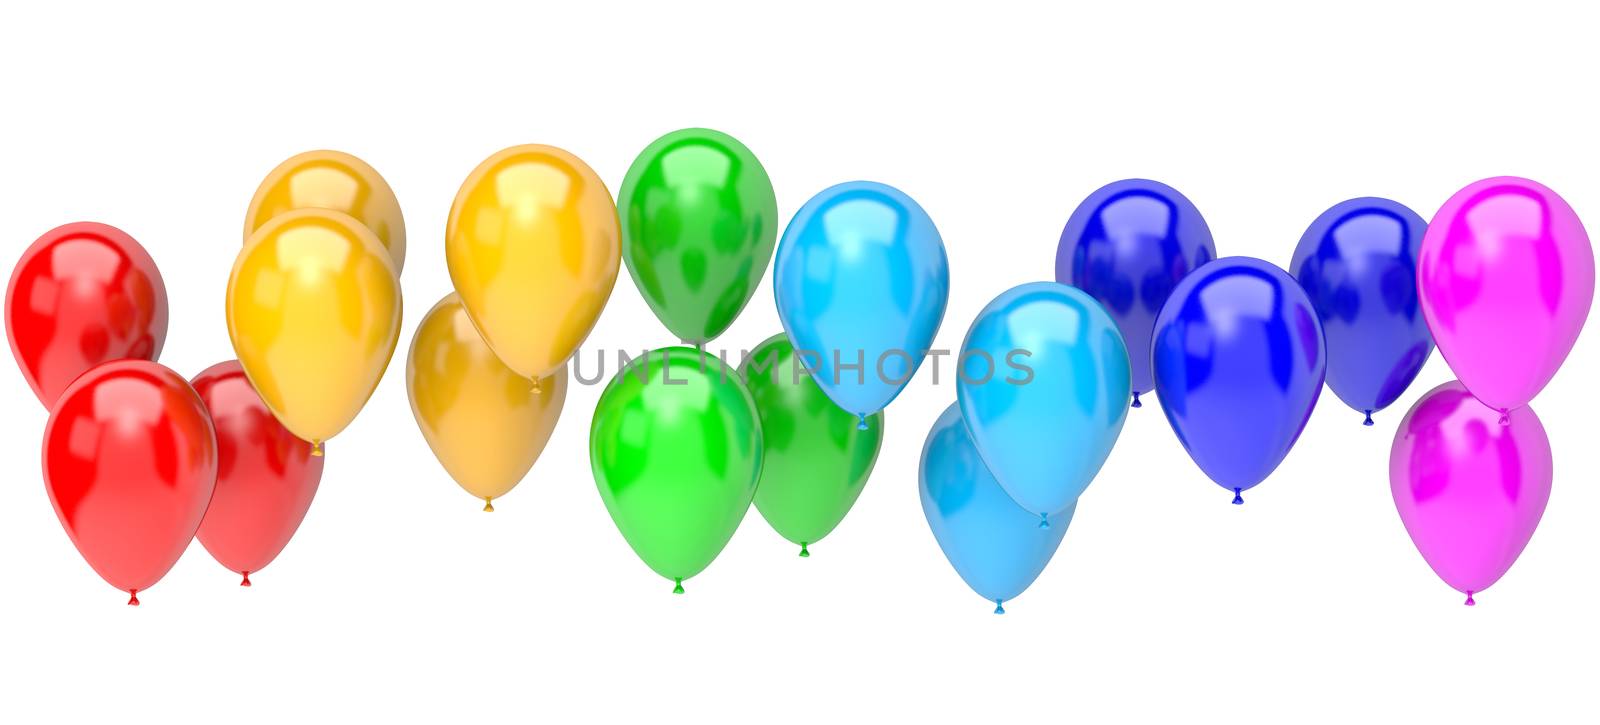 Rainbow Color Balloons by make